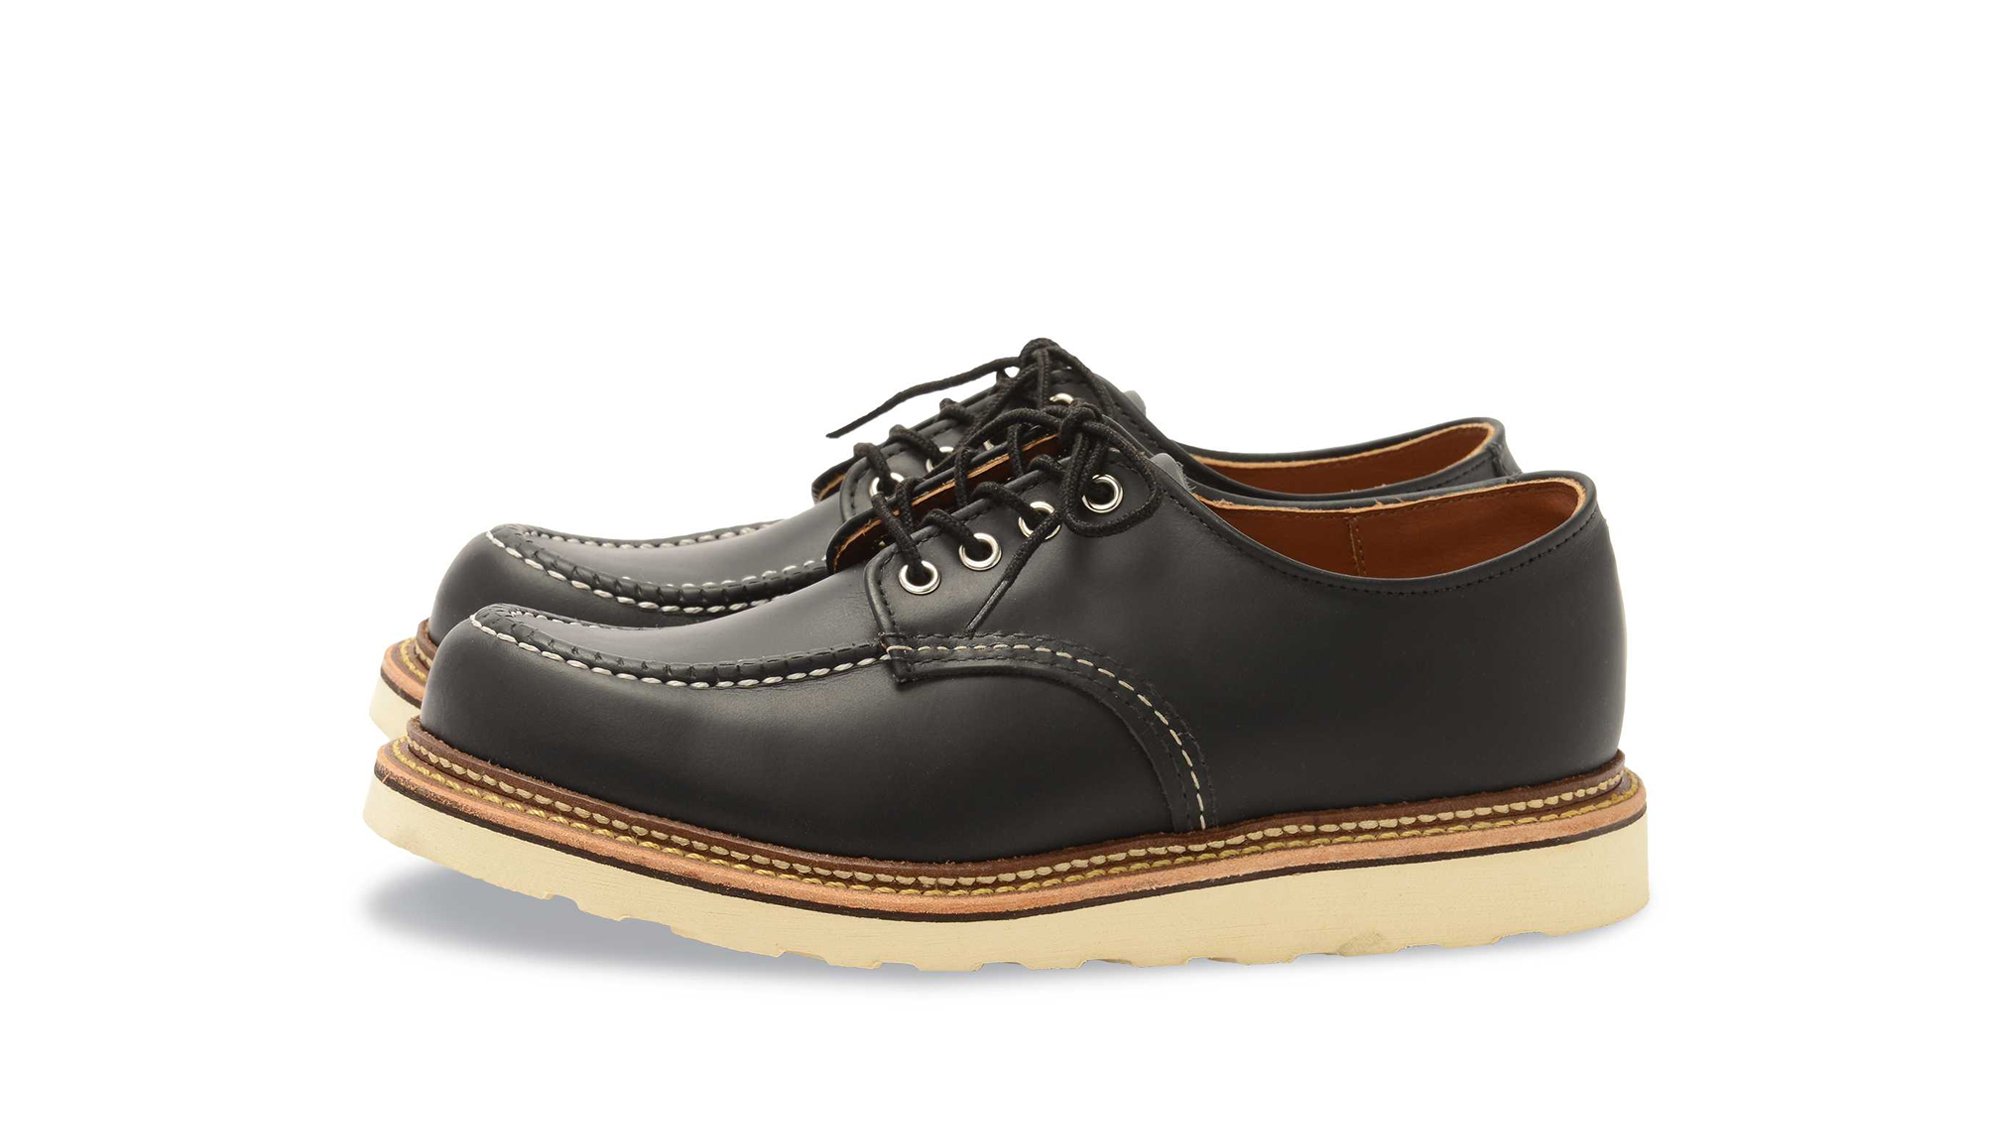 Shop the Moc Toe Oxford 8109 | Official Red Wing Shoes Online Store